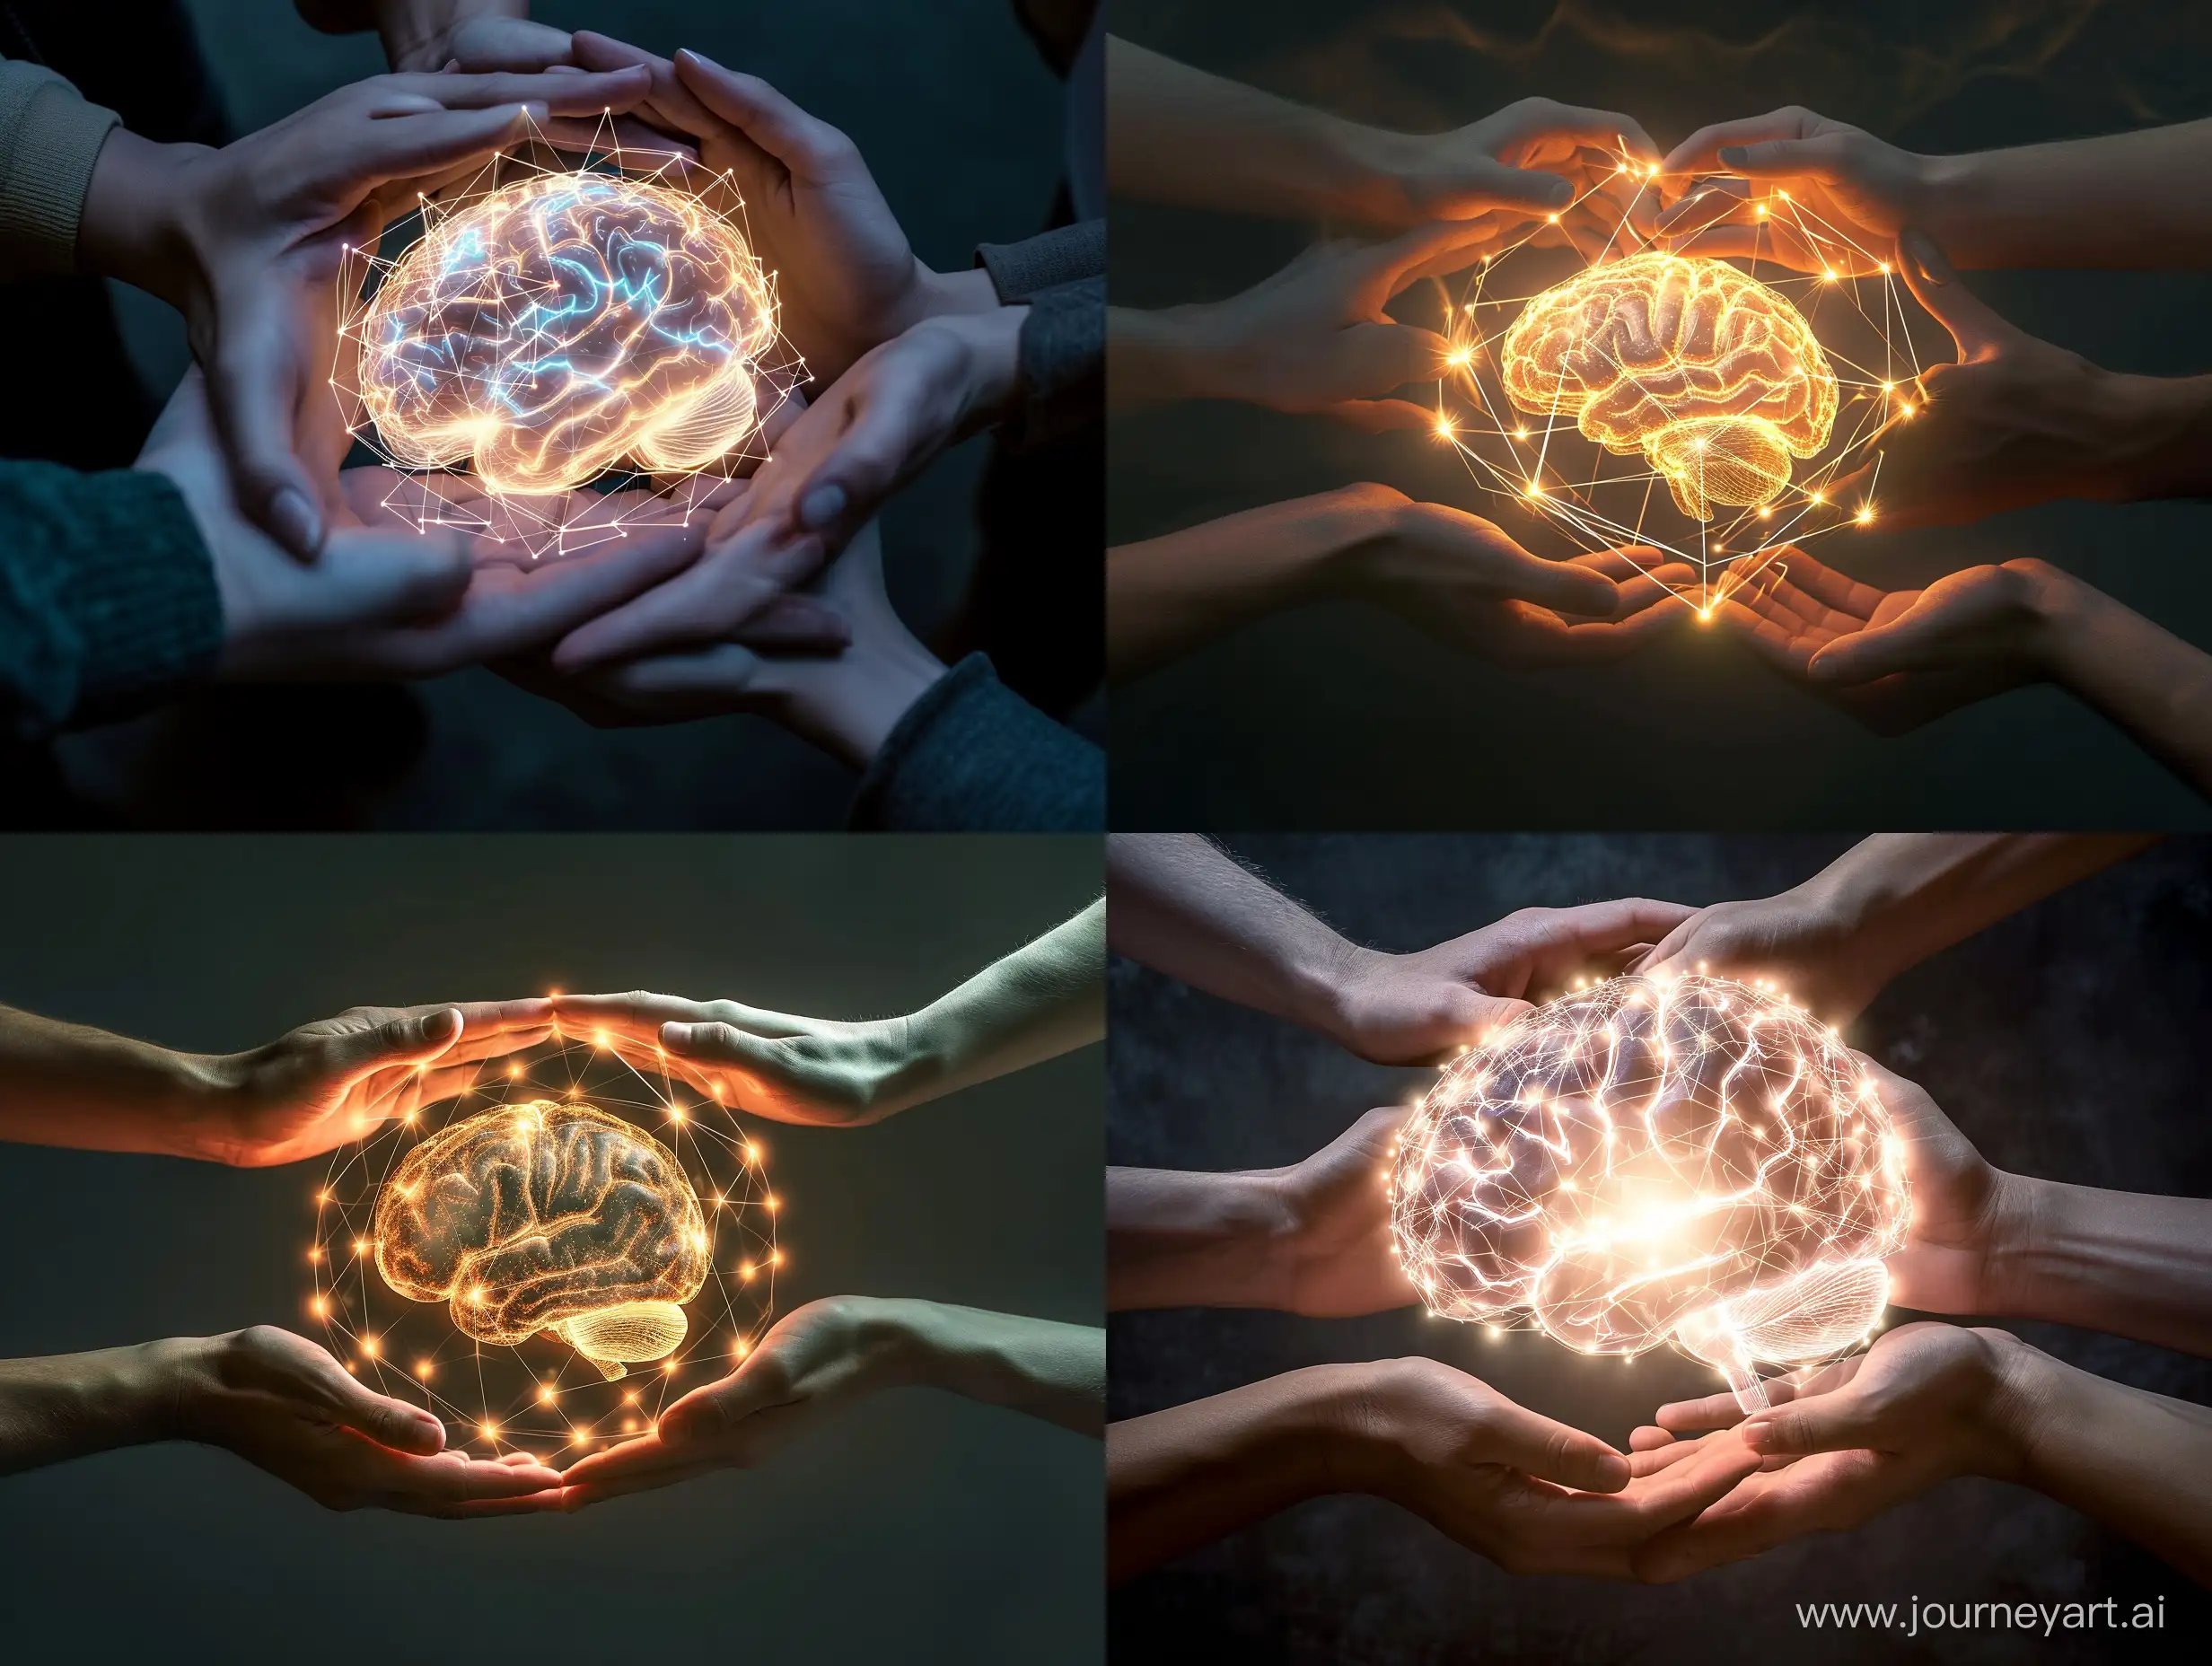 Prompt for MidJourney, a text-to-image AI:

Image: An interconnected network of hands encircling a glowing brain.

Descriptive keywords: The hands delicately caressing the brain, glowing softly with subtle hues.

Photographic style: Realistic.

Tone: The image should radiate wonder and curiosity, yet convey a sense of gentle care and appreciation.

Object: The main object in the image is a vibrant, radiant brain floating in mid-air.

Action: The hands are gently embracing the brain, creating a visual representation of the symbiotic relationship between human touch and intellectual pursuit.